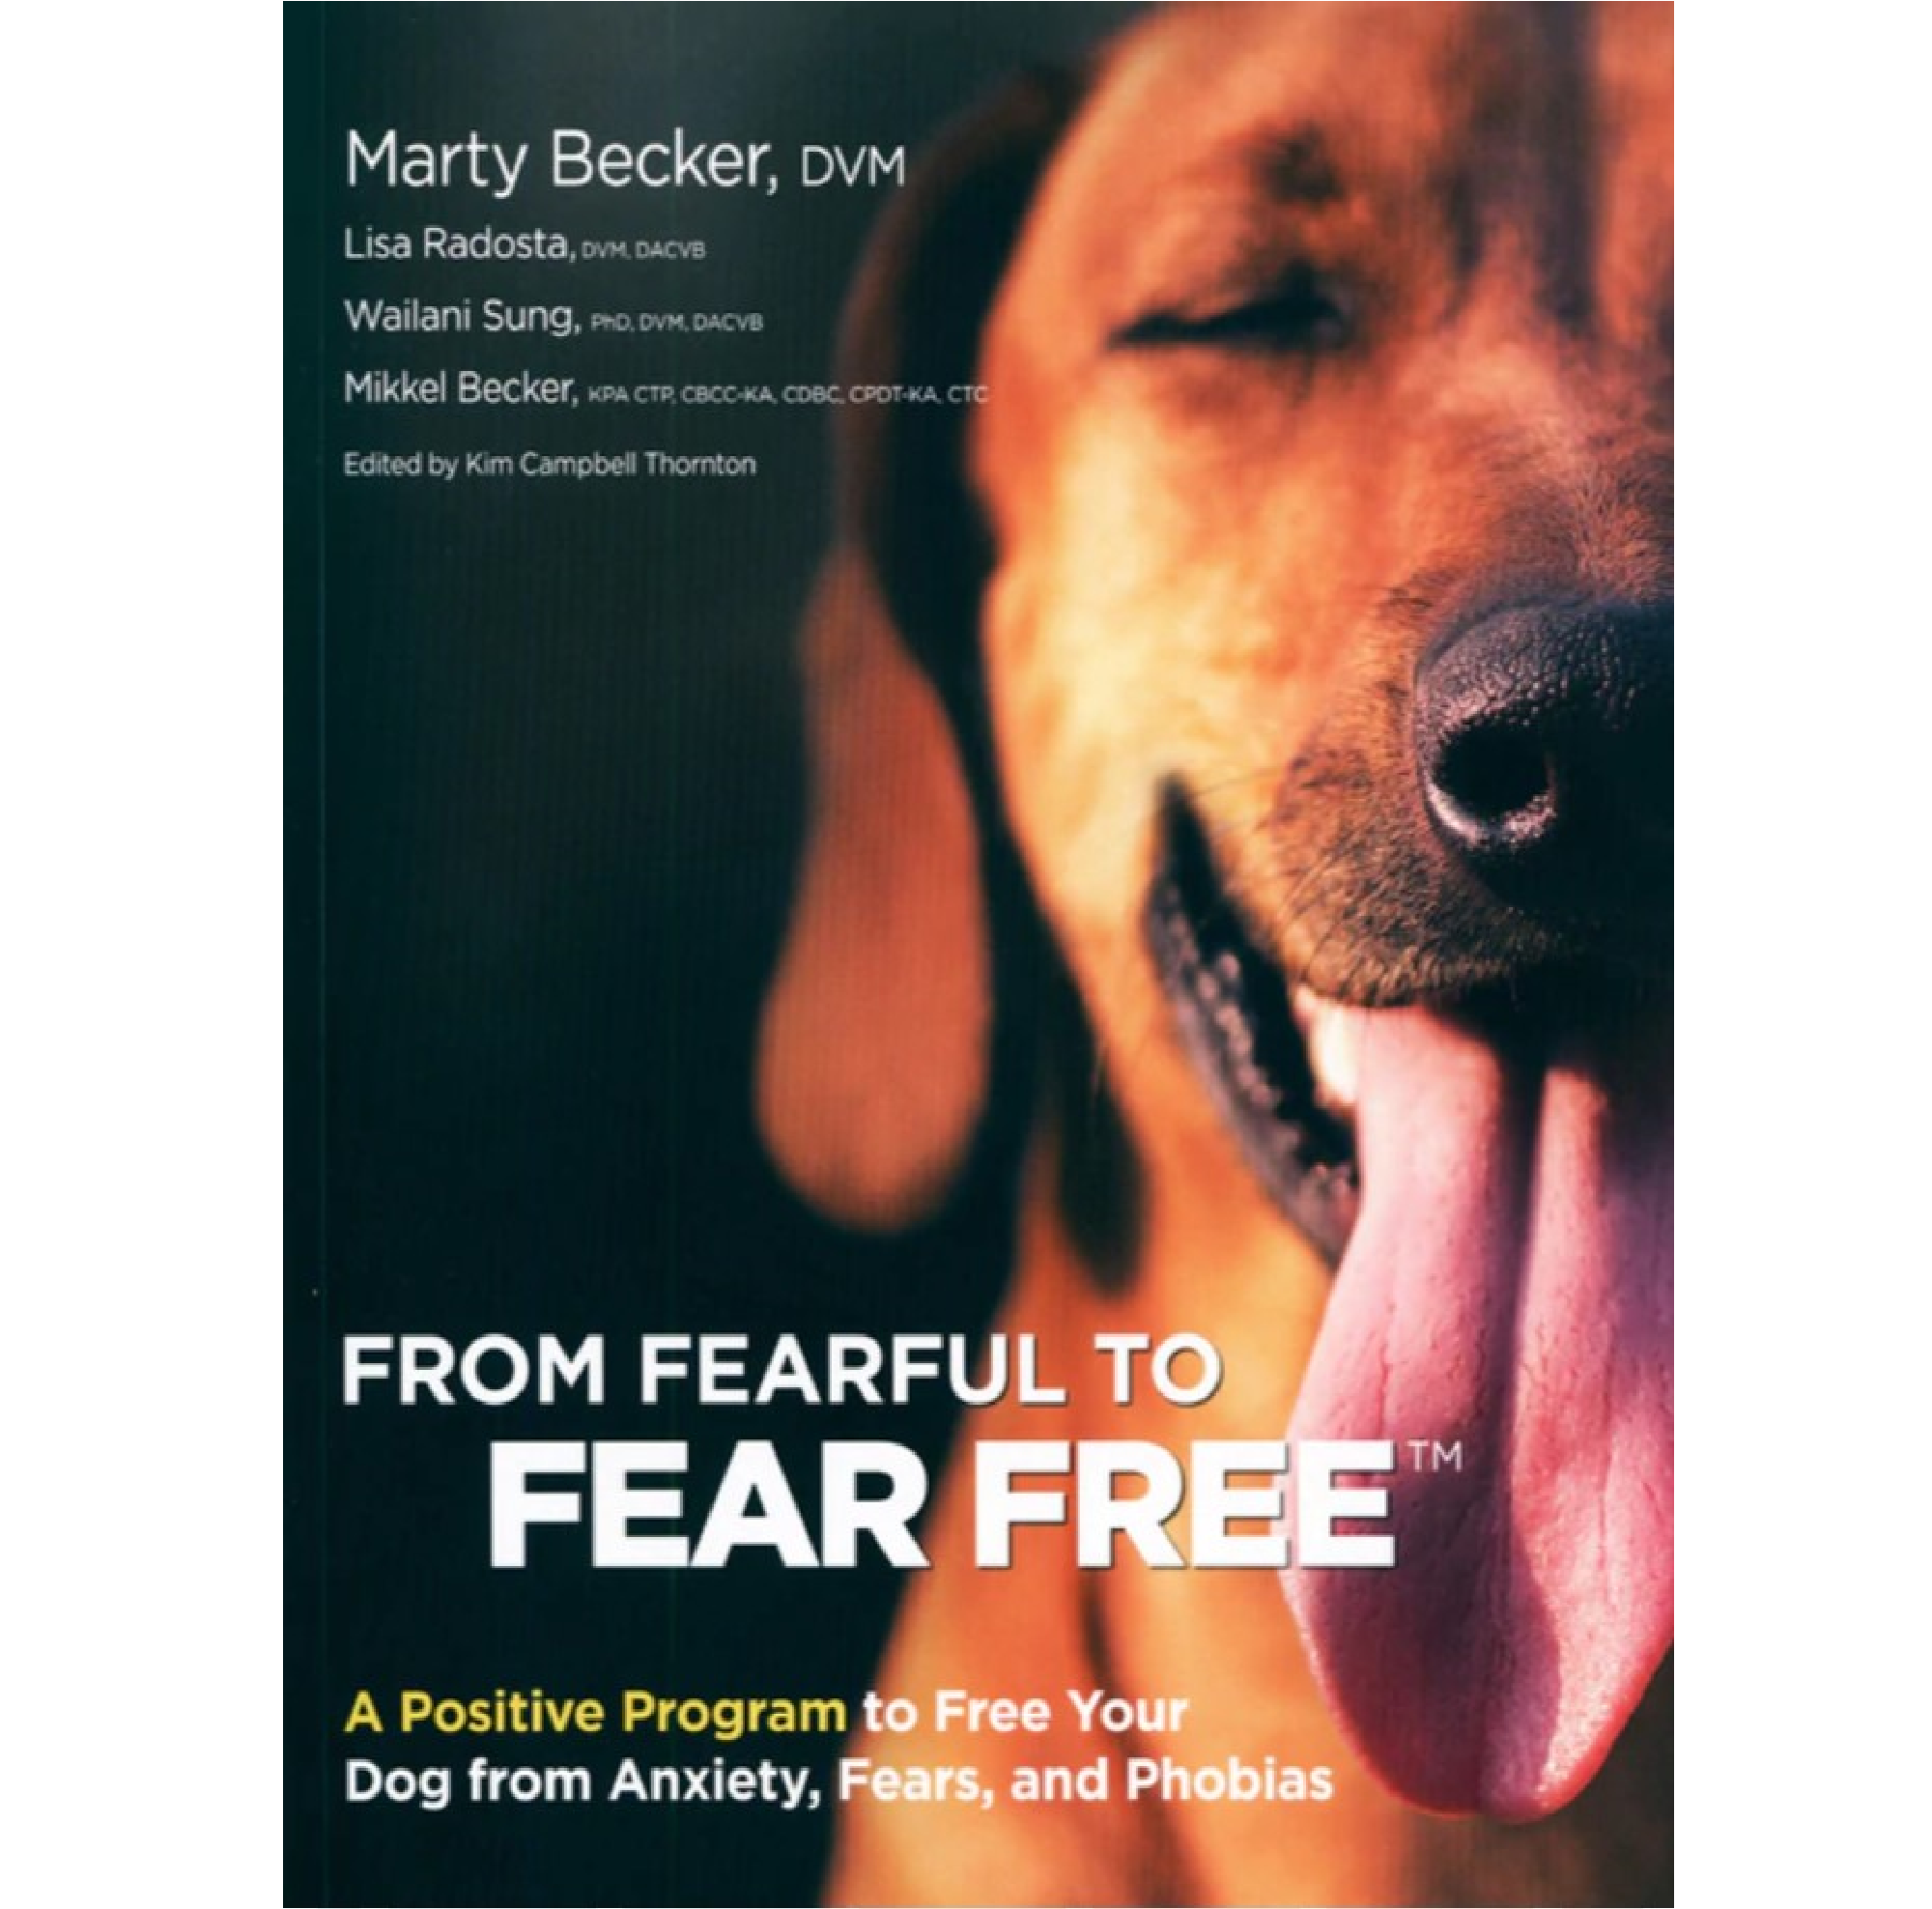 From Fearful To Fear Free: A Positive Program To Free Your Dog From Anxiety, Fears, and Phobias